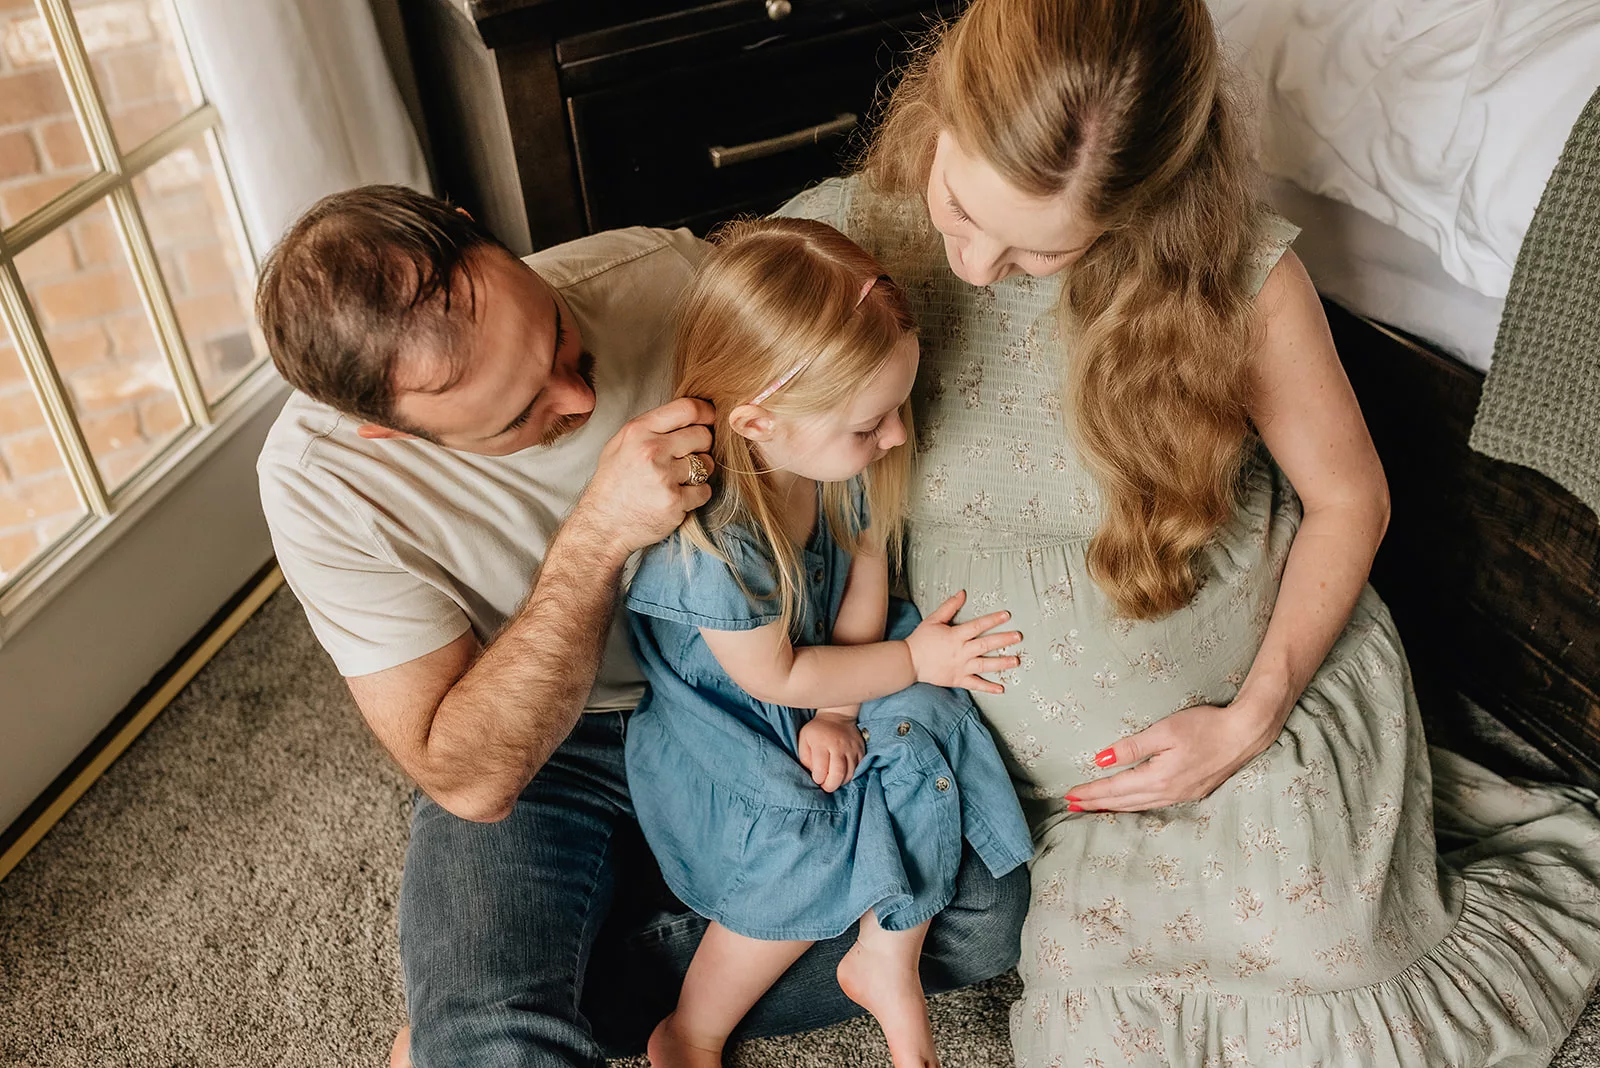 A mom and dad sit on the floor of a bedroom with their toddler daughter touching mom's pregnant bump